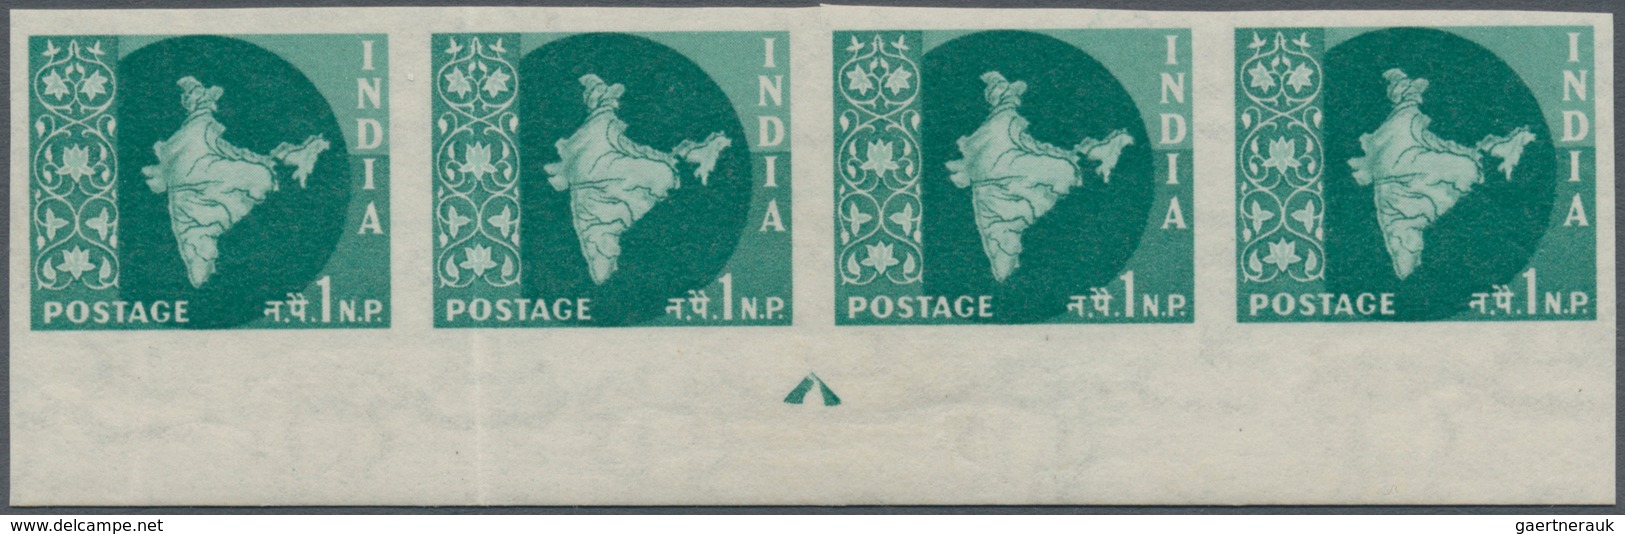 Indien: 1958-63 'Map Of India' 1n.p. Blue-green, Wmk. Asokan Capital, IMPERFORATED CENTRAL BOTTOM MA - 1852 Sind Province